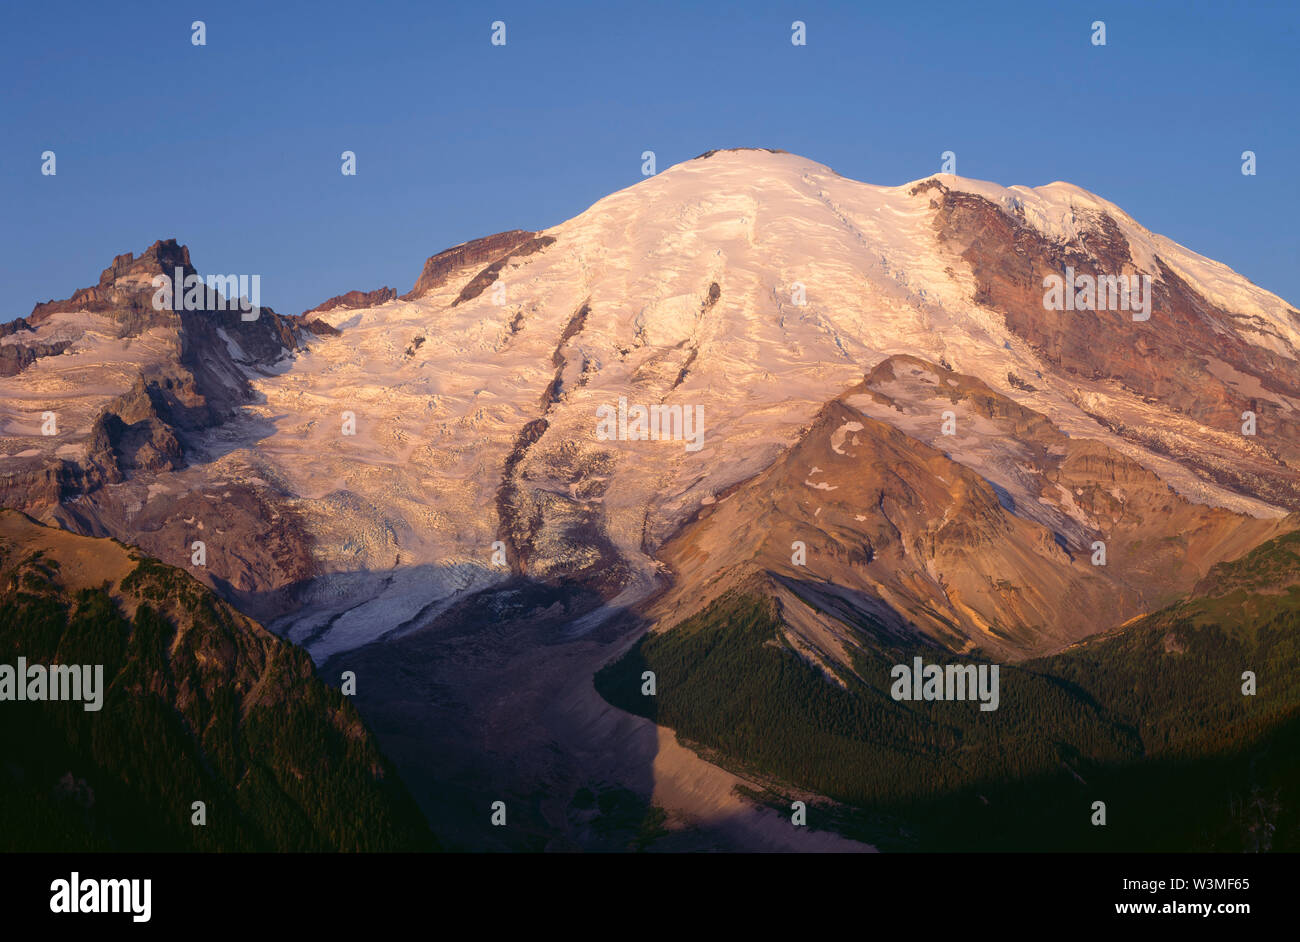 USA, Washington, Mt. Rainier National Park, First light of day on Emmons Glacier and east side of Mt. Rainier, from Sunrise area. Stock Photo